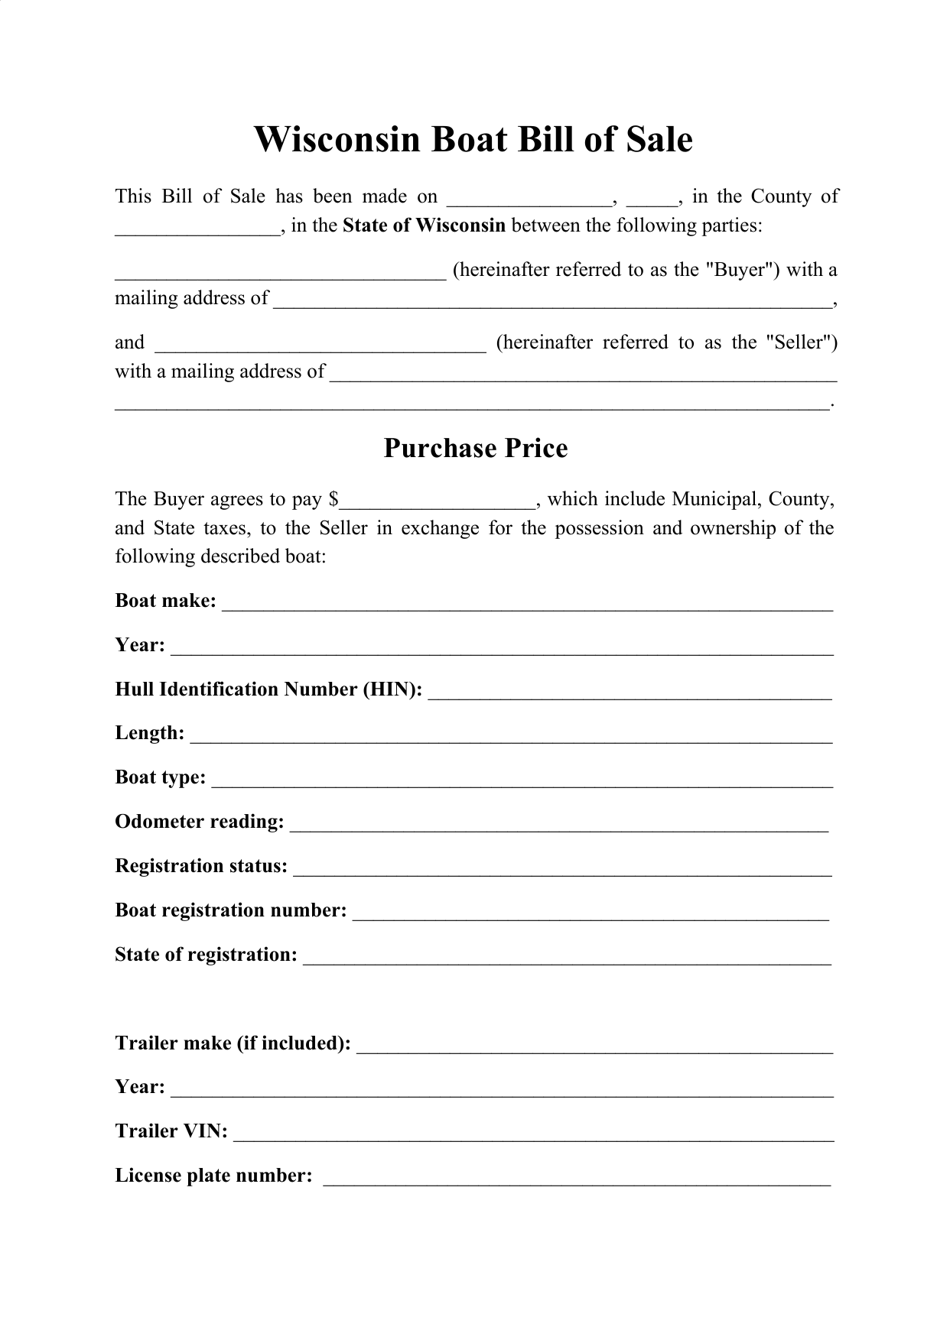 Boat Bill of Sale Form - Wisconsin, Page 1